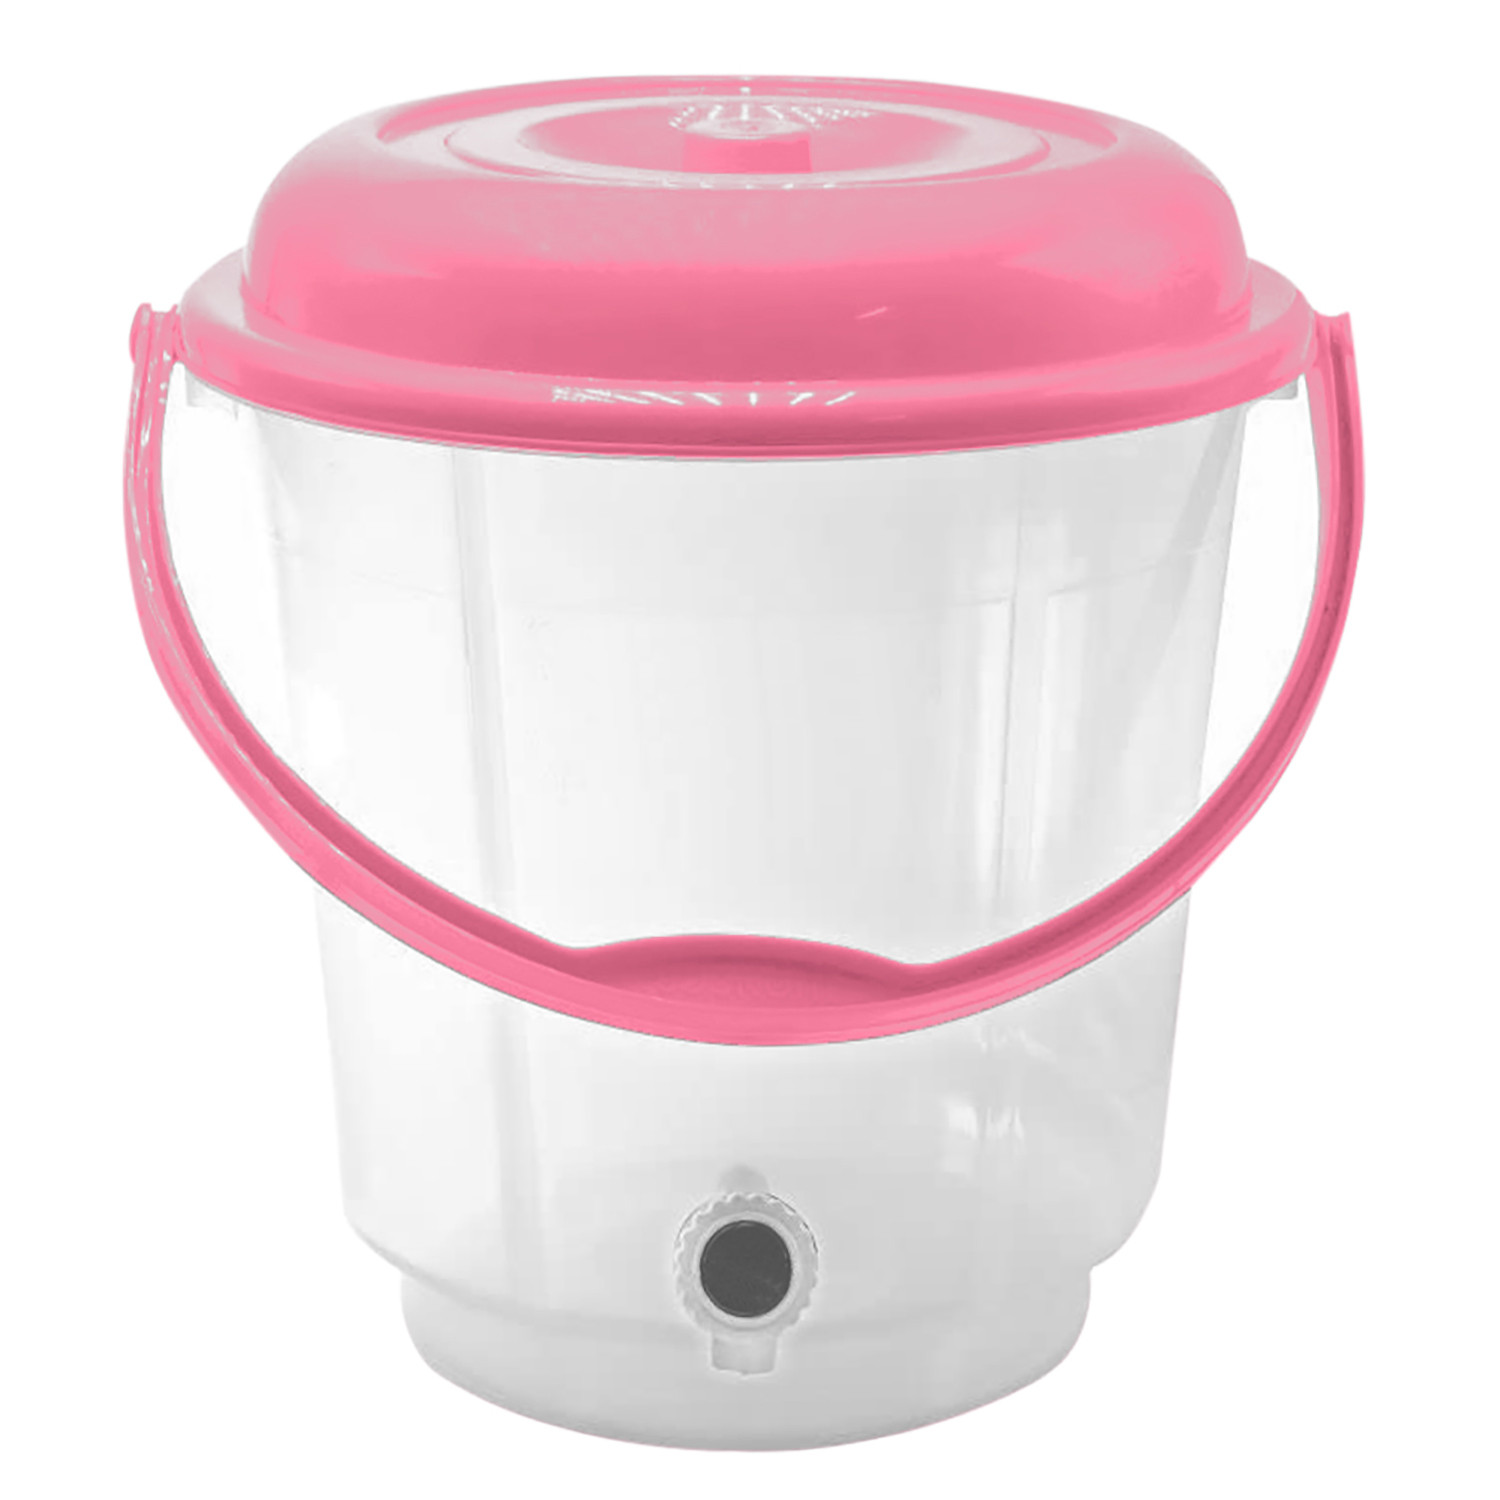 Kuber Industries Multipurposes Plastic Transparent Bucket With Lid & Tap System For Home Cleaning & Save Water, 18Ltr. (Pink)